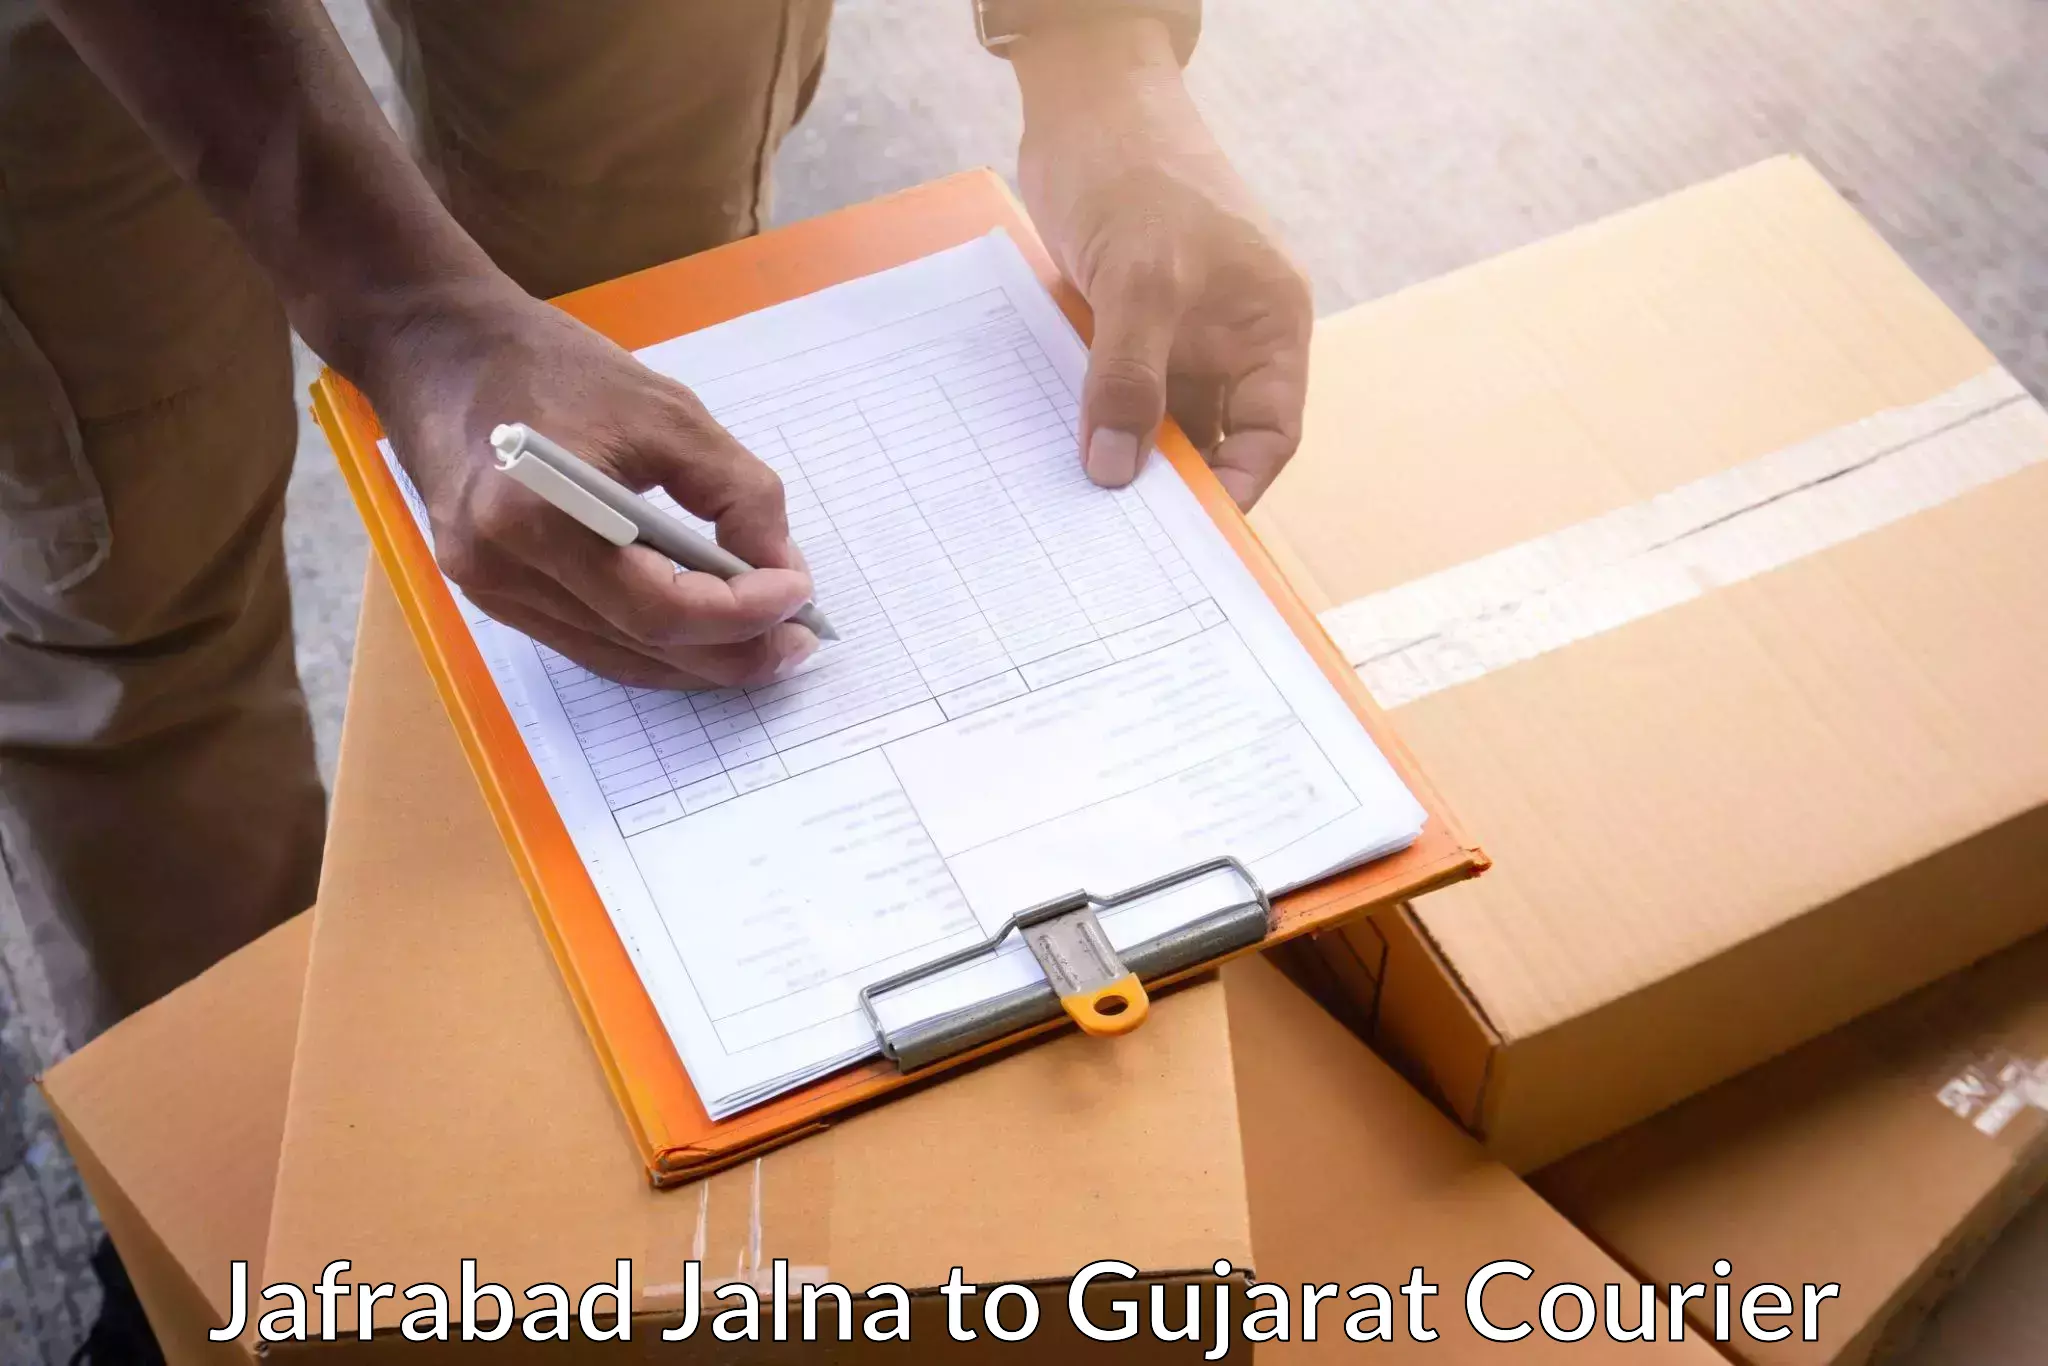 Courier services Jafrabad Jalna to Ahwa